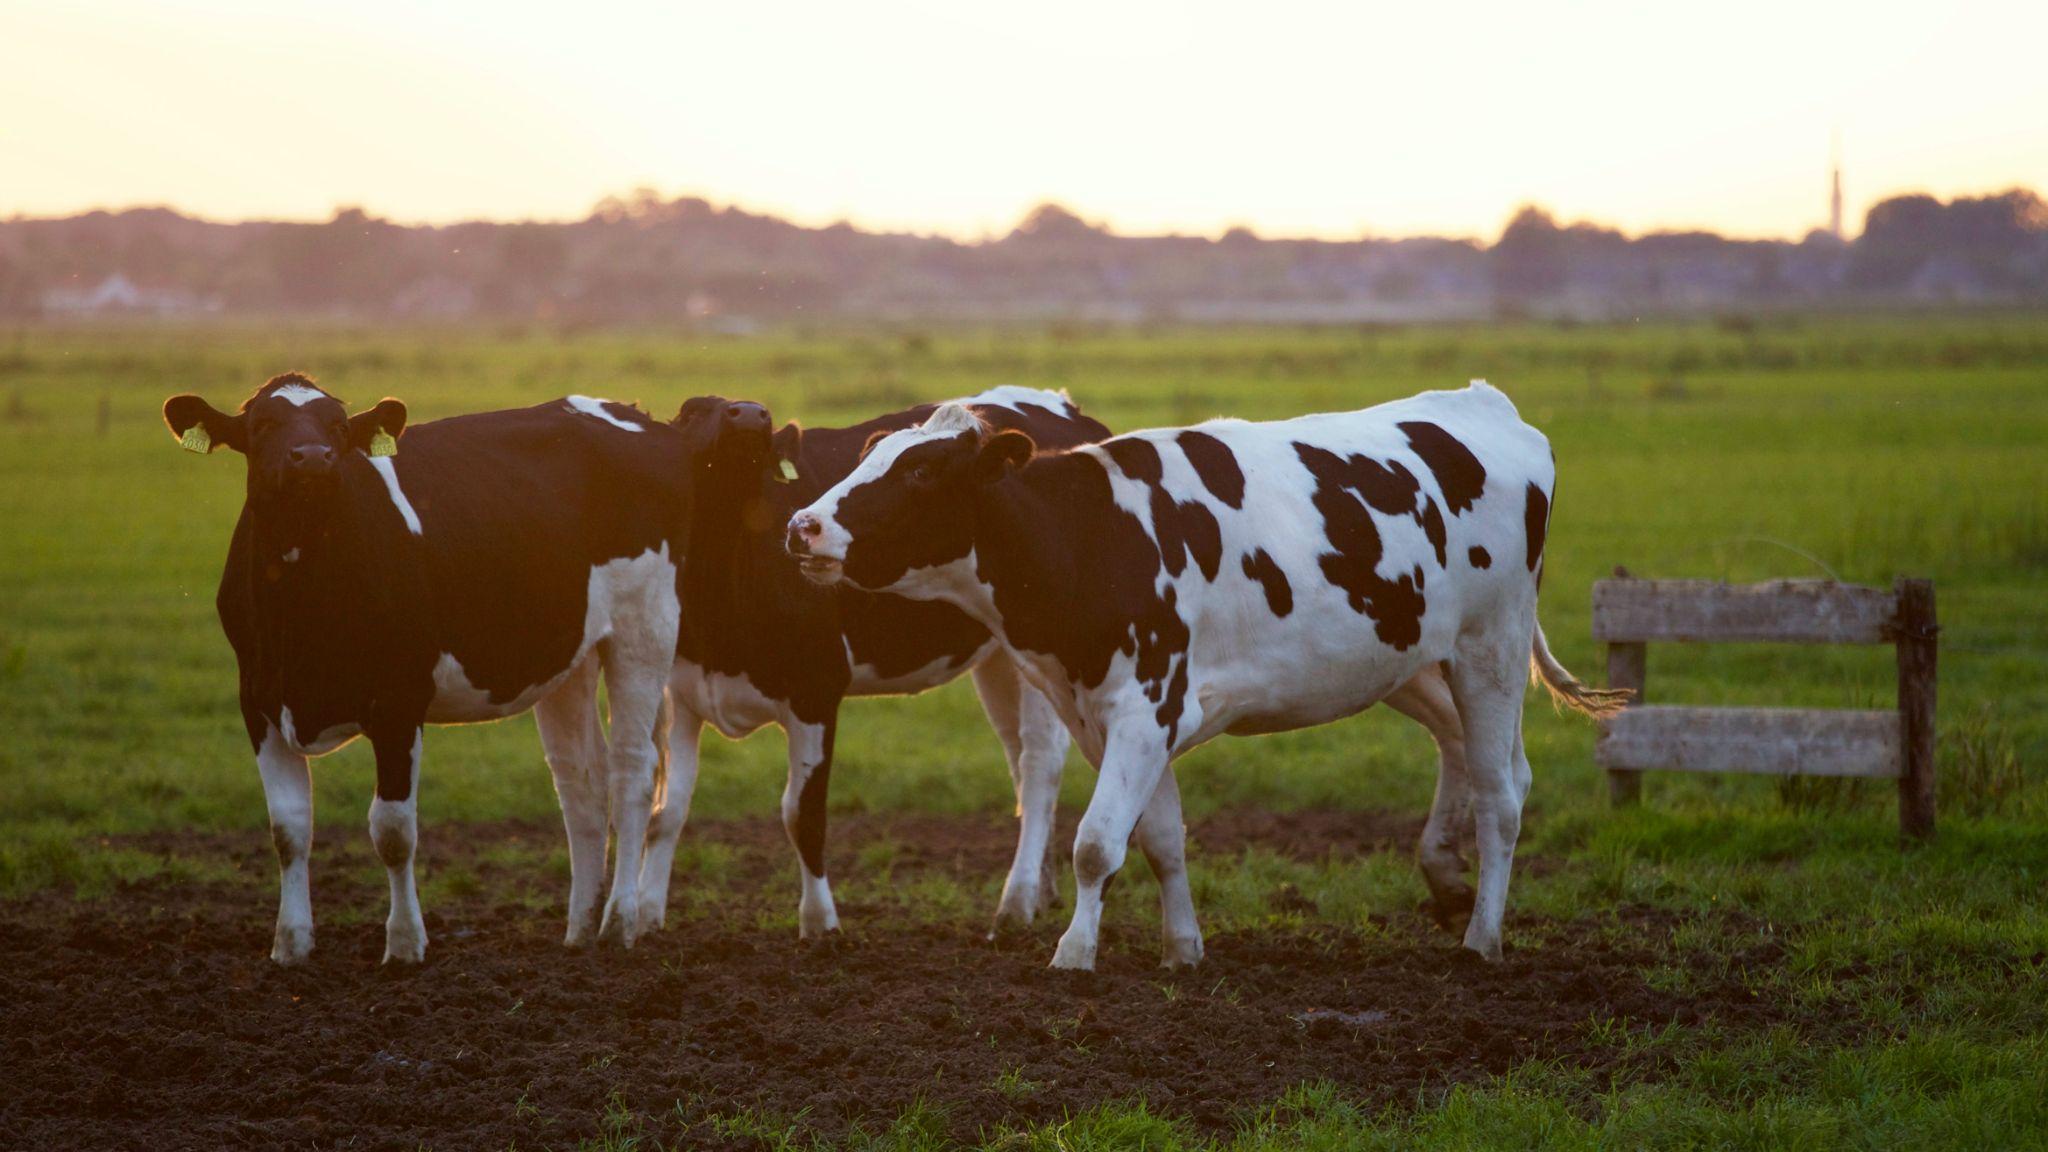 Moo-ving Towards the Best: A Guide to Nourishing Healthy Cattle